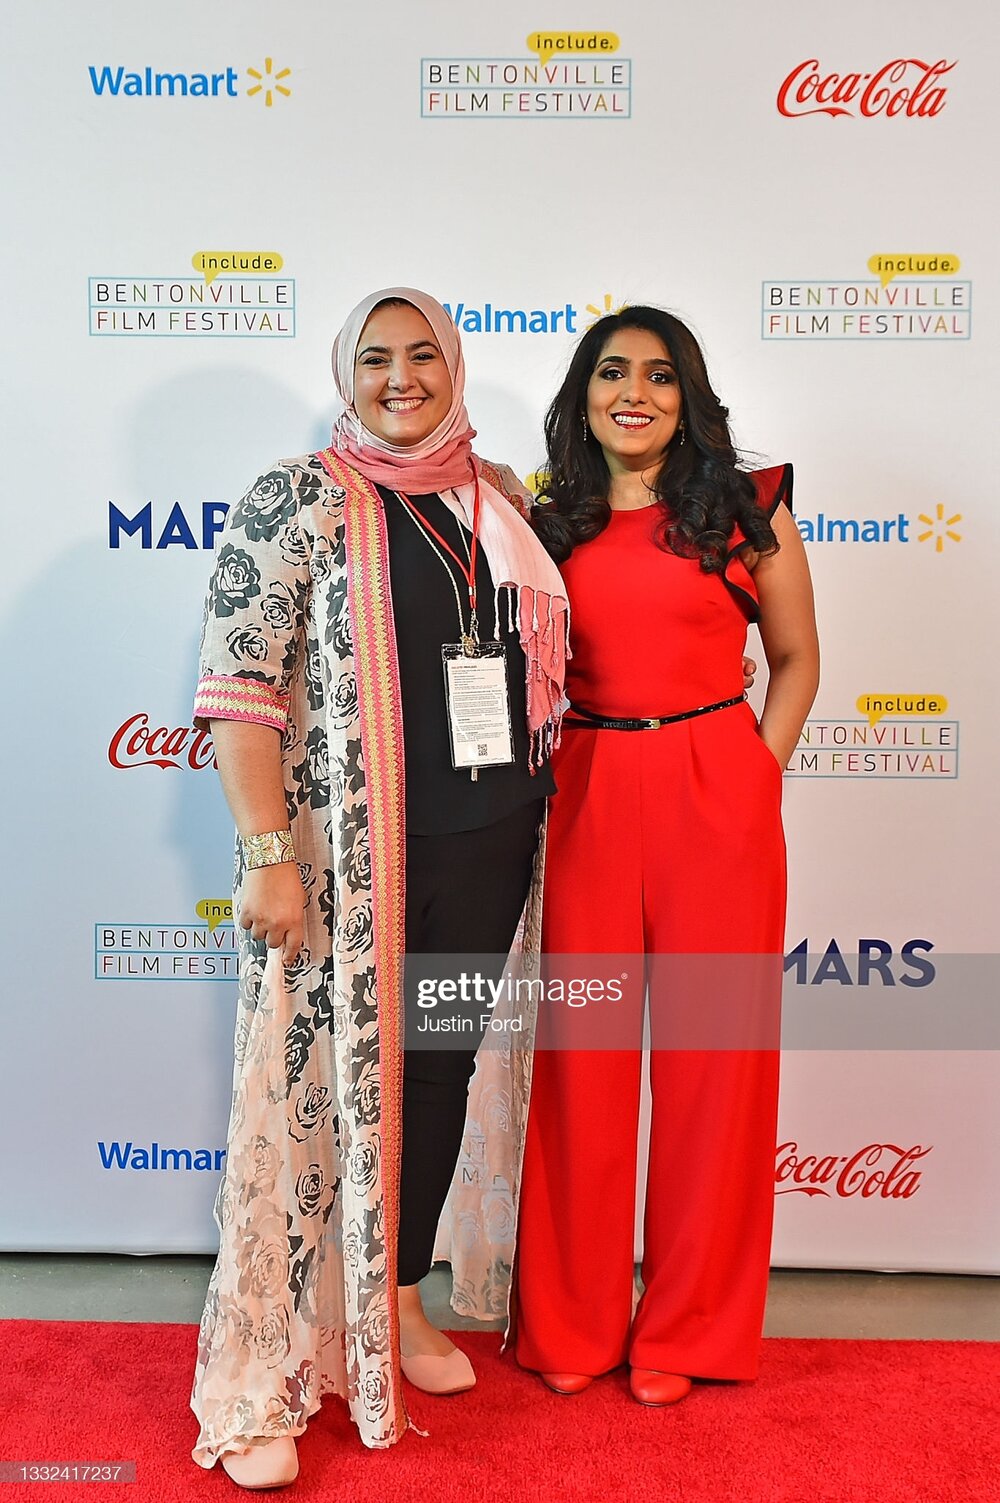 BENTONVILLE, ARKANSAS - AUGUST 04: (L to R) Iman Zawahry and Aizzah Fatima of "Americanish" attend the 2021 Bentonville Film Festival opening night red carpet and filmmaker reception on August 04, 2021 in Bentonville, Arkansas. (Photo by Justin Ford/Getty Images for BFFoundation)